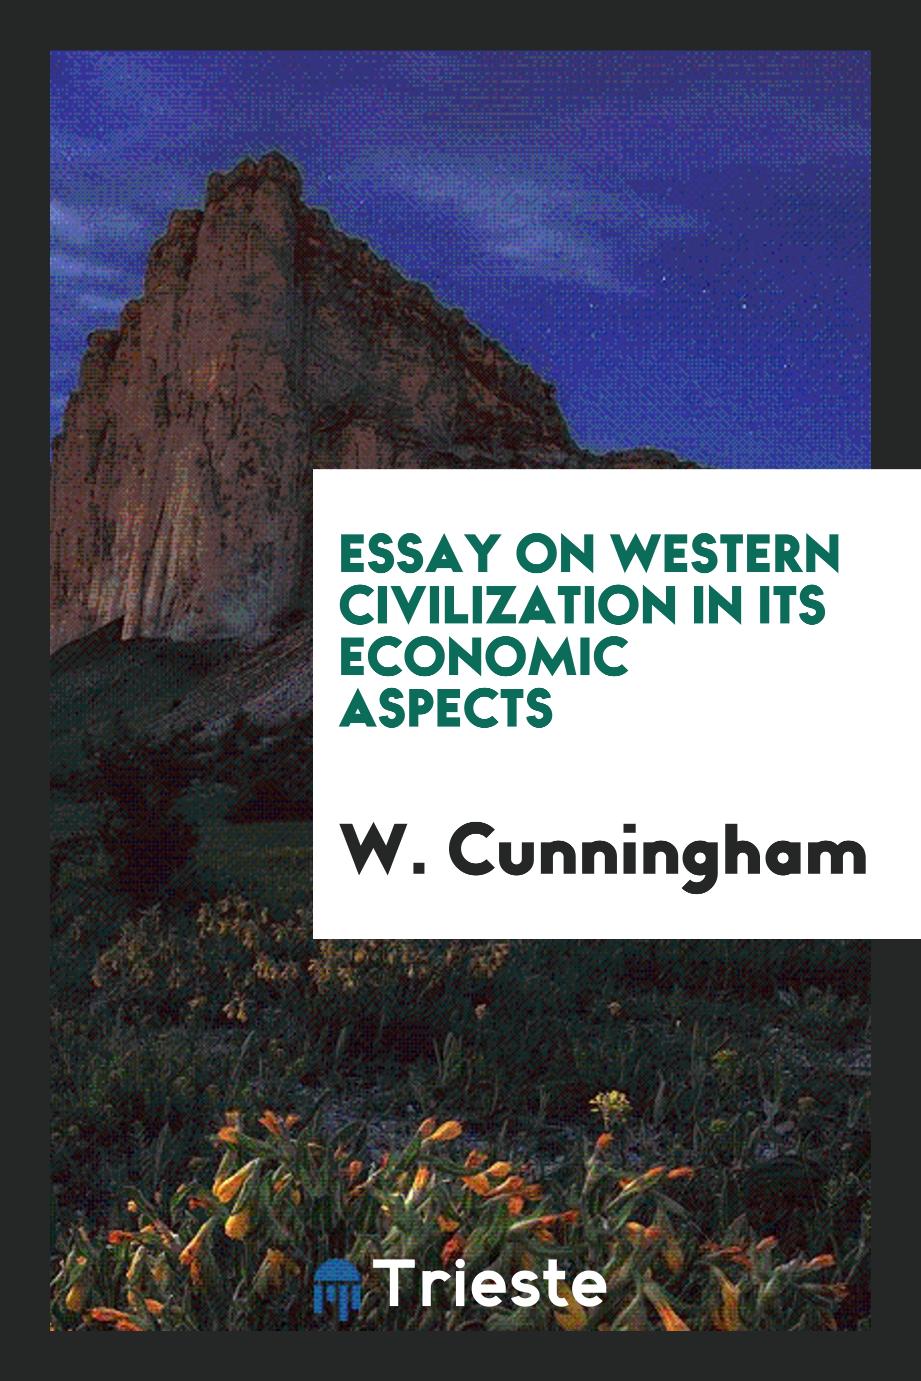 Essay on western civilization in its economic aspects